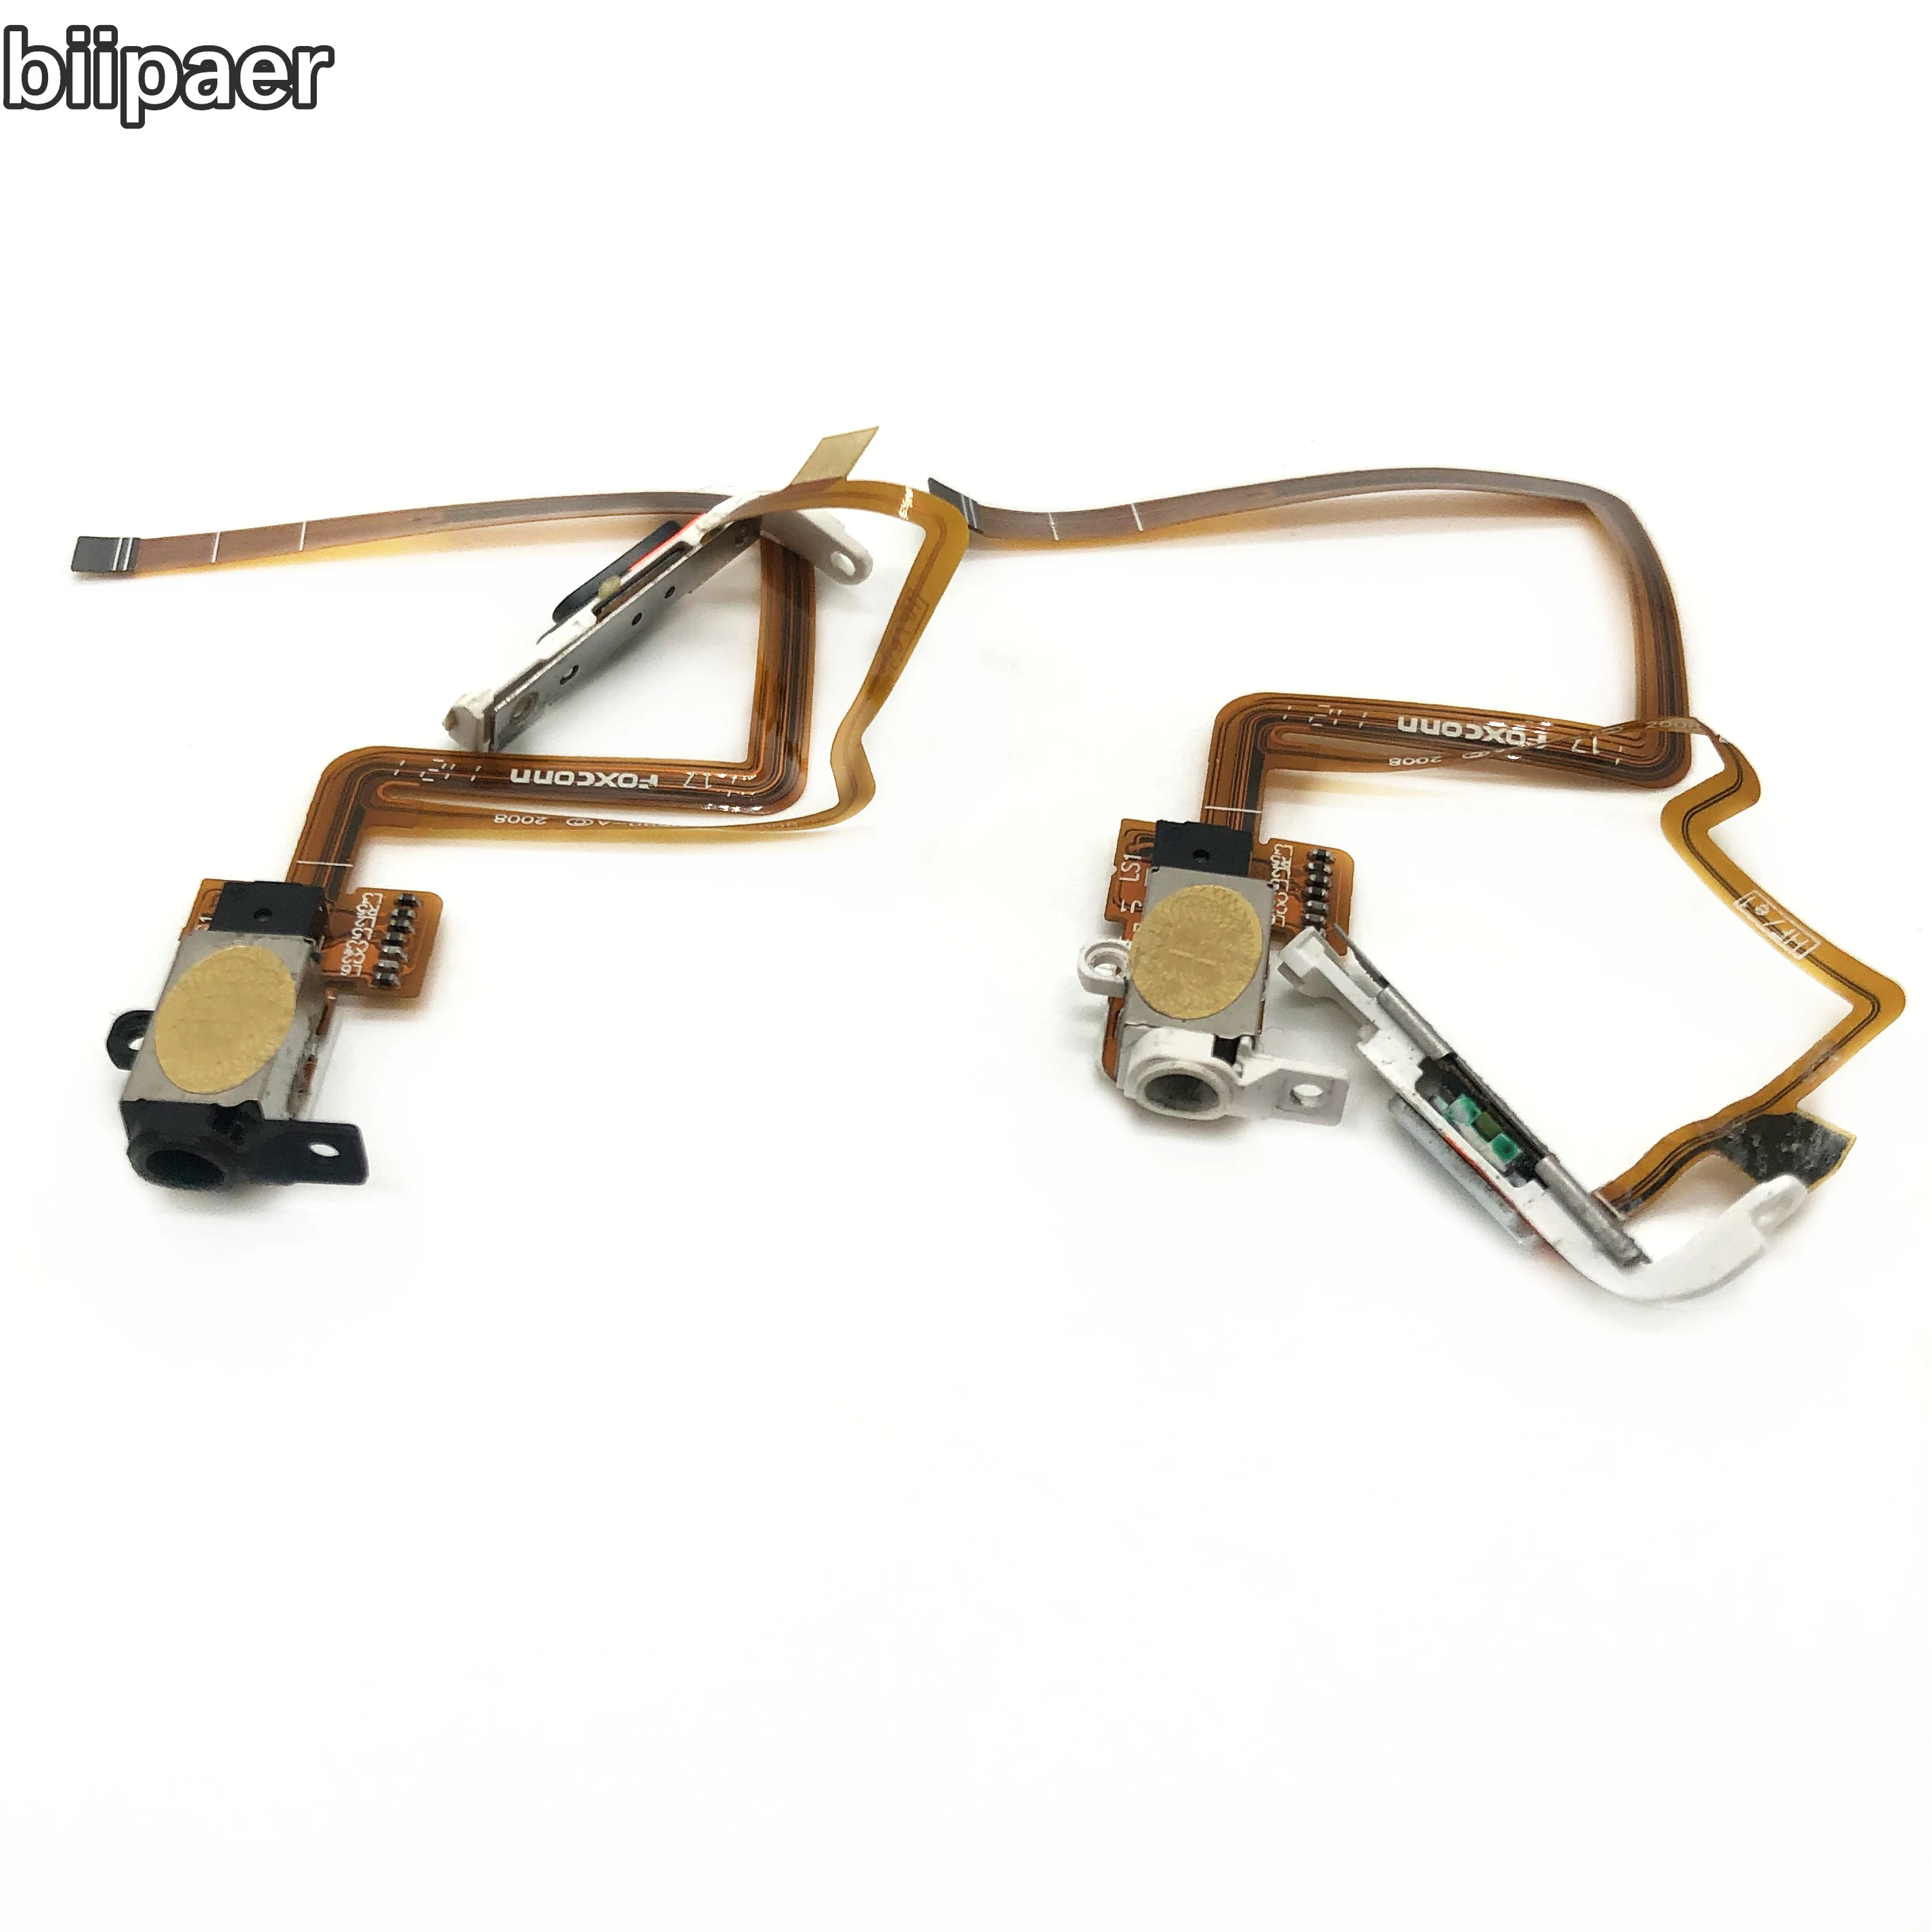 

Thin Headphone audio jack hold switch flex ribbon cable For iPod 6th gen classic 80gb 120gb and 7th thin 160GB Video